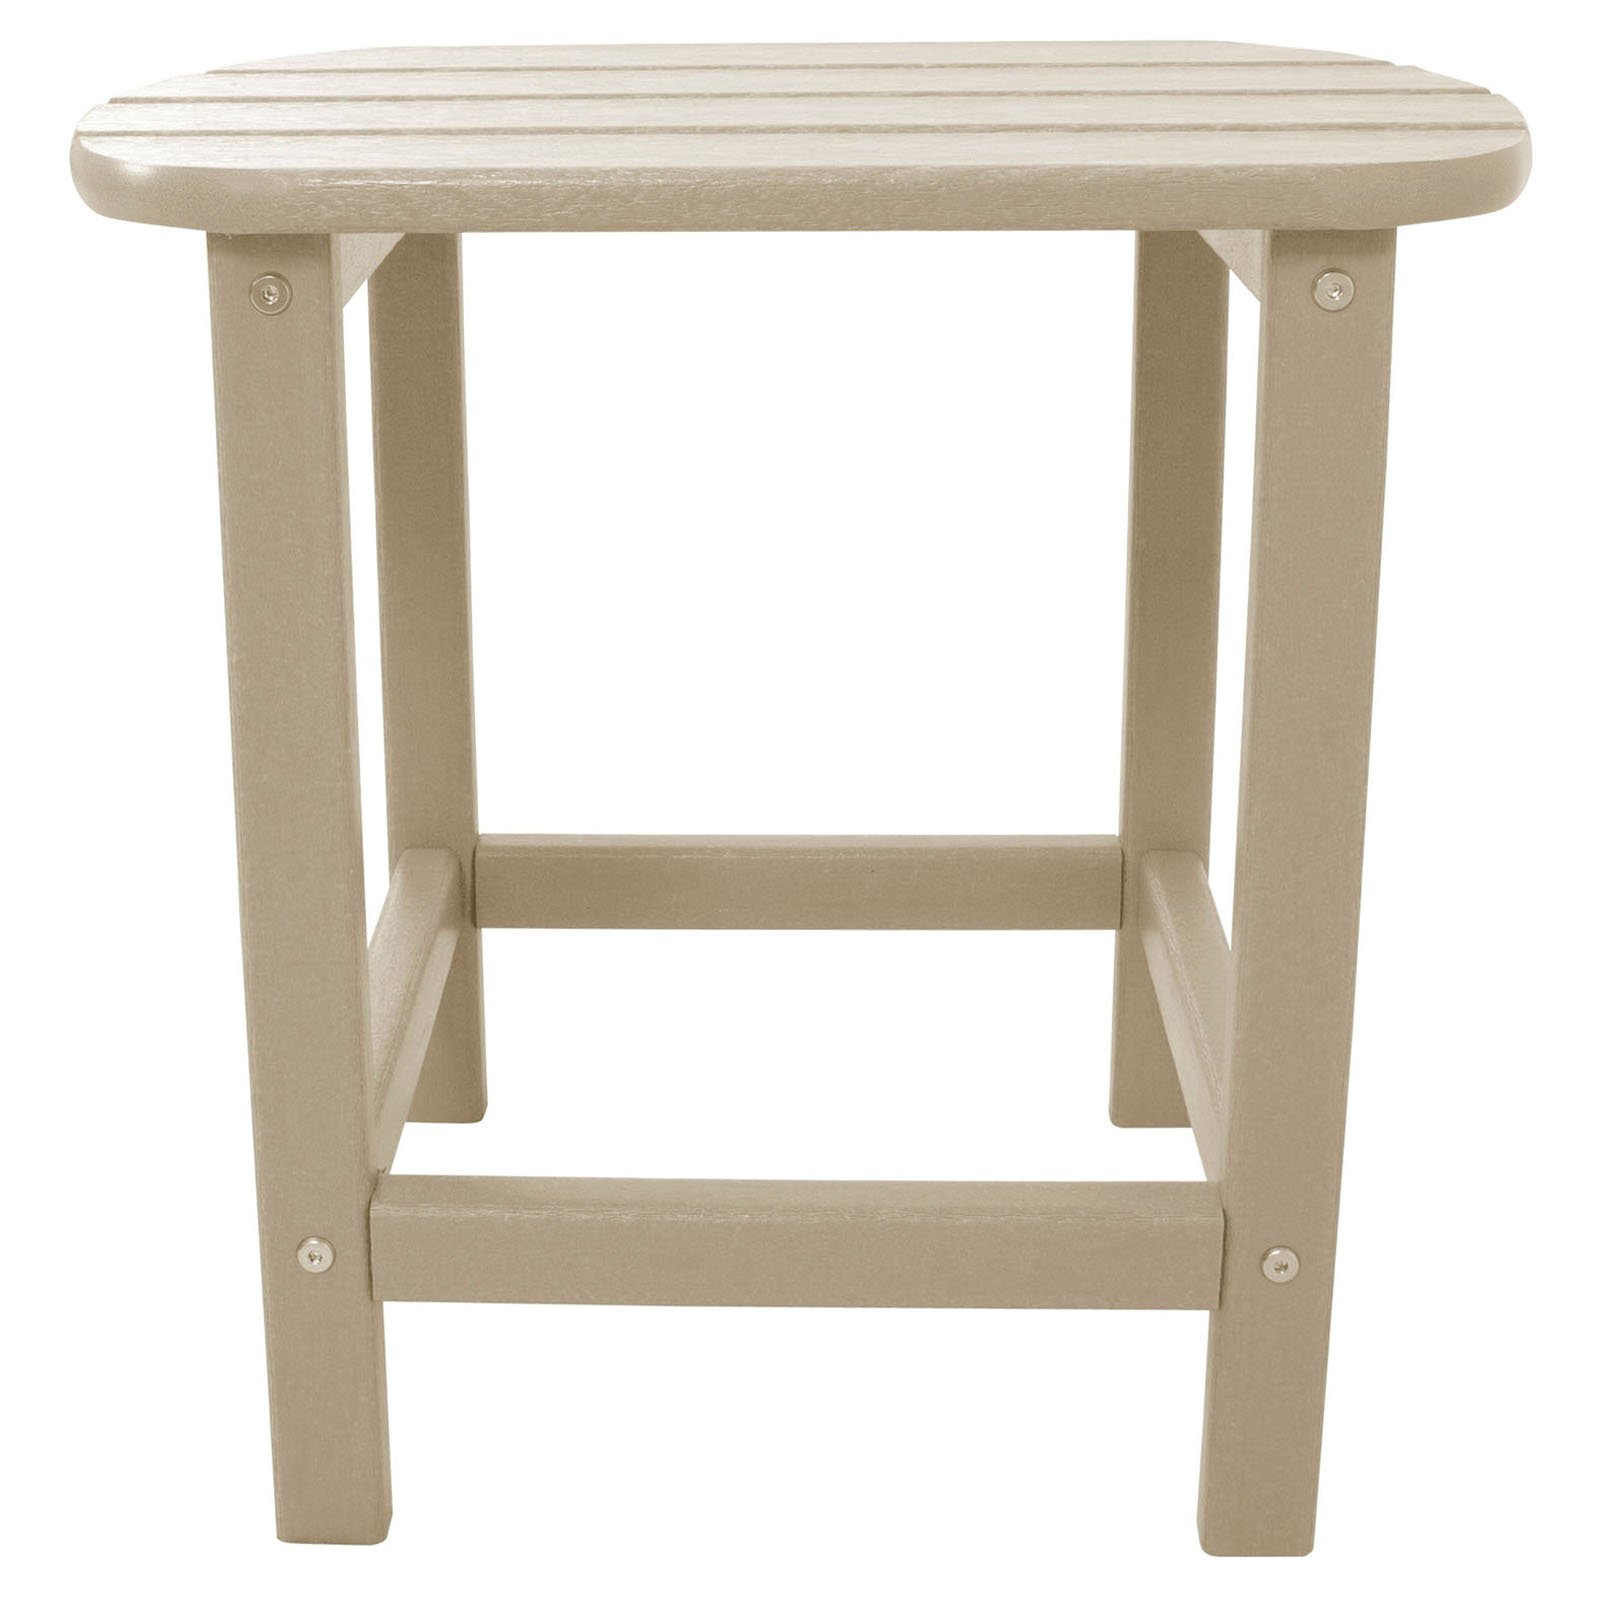 Hanover Outdoor All-Weather Side Table - image 5 of 11